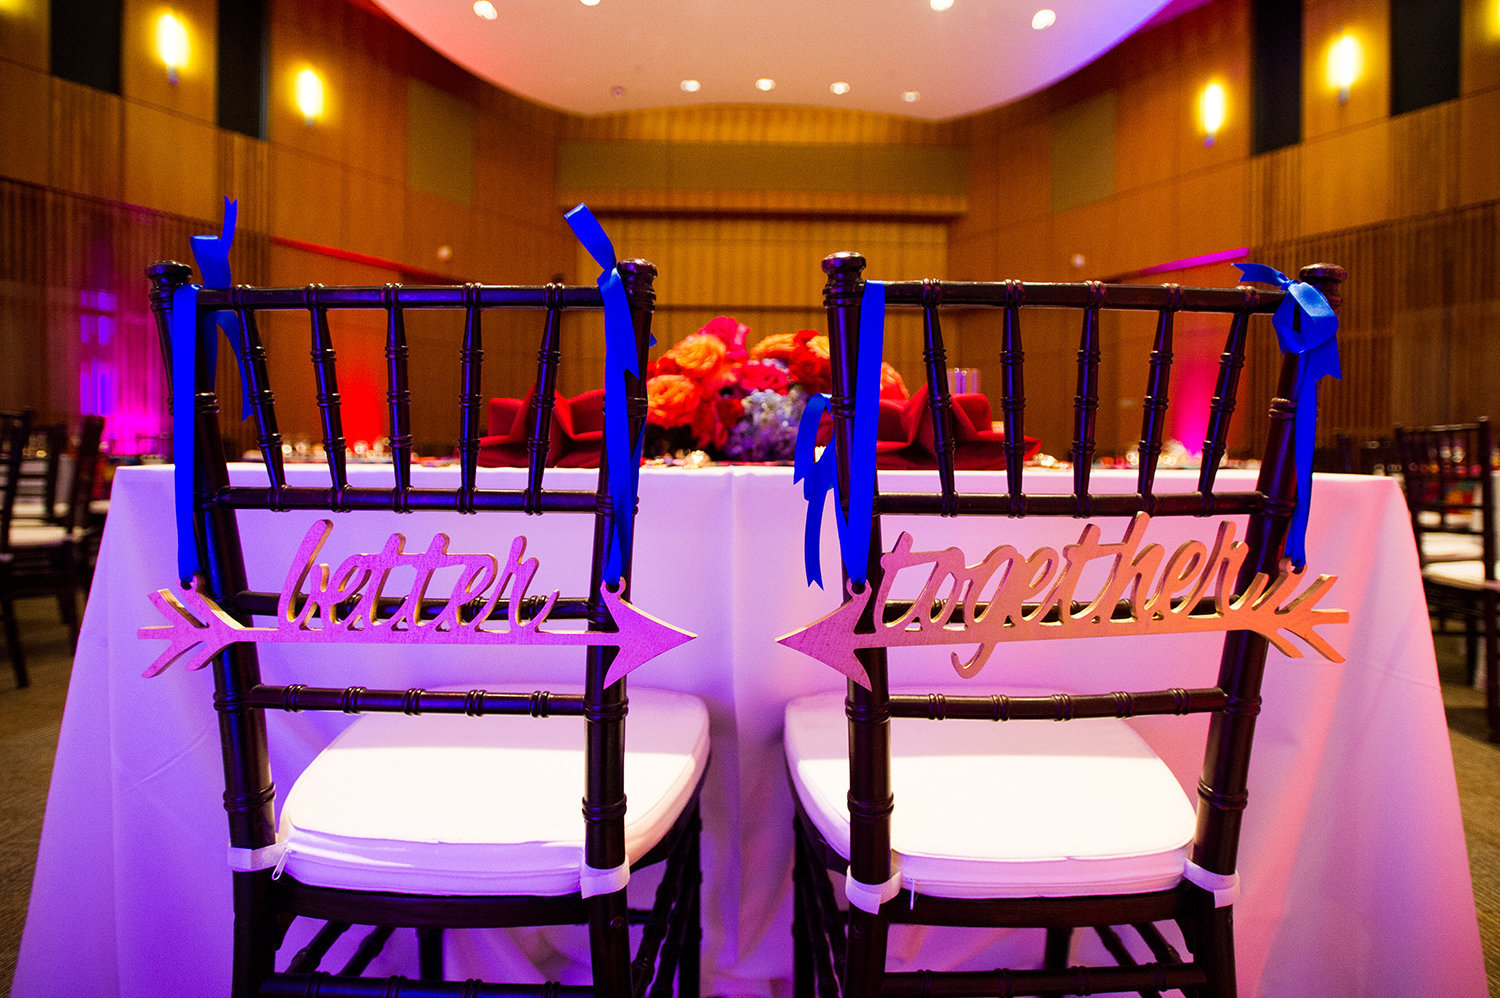 Cute chair signs for the bride and groom at an Indian wedding reception